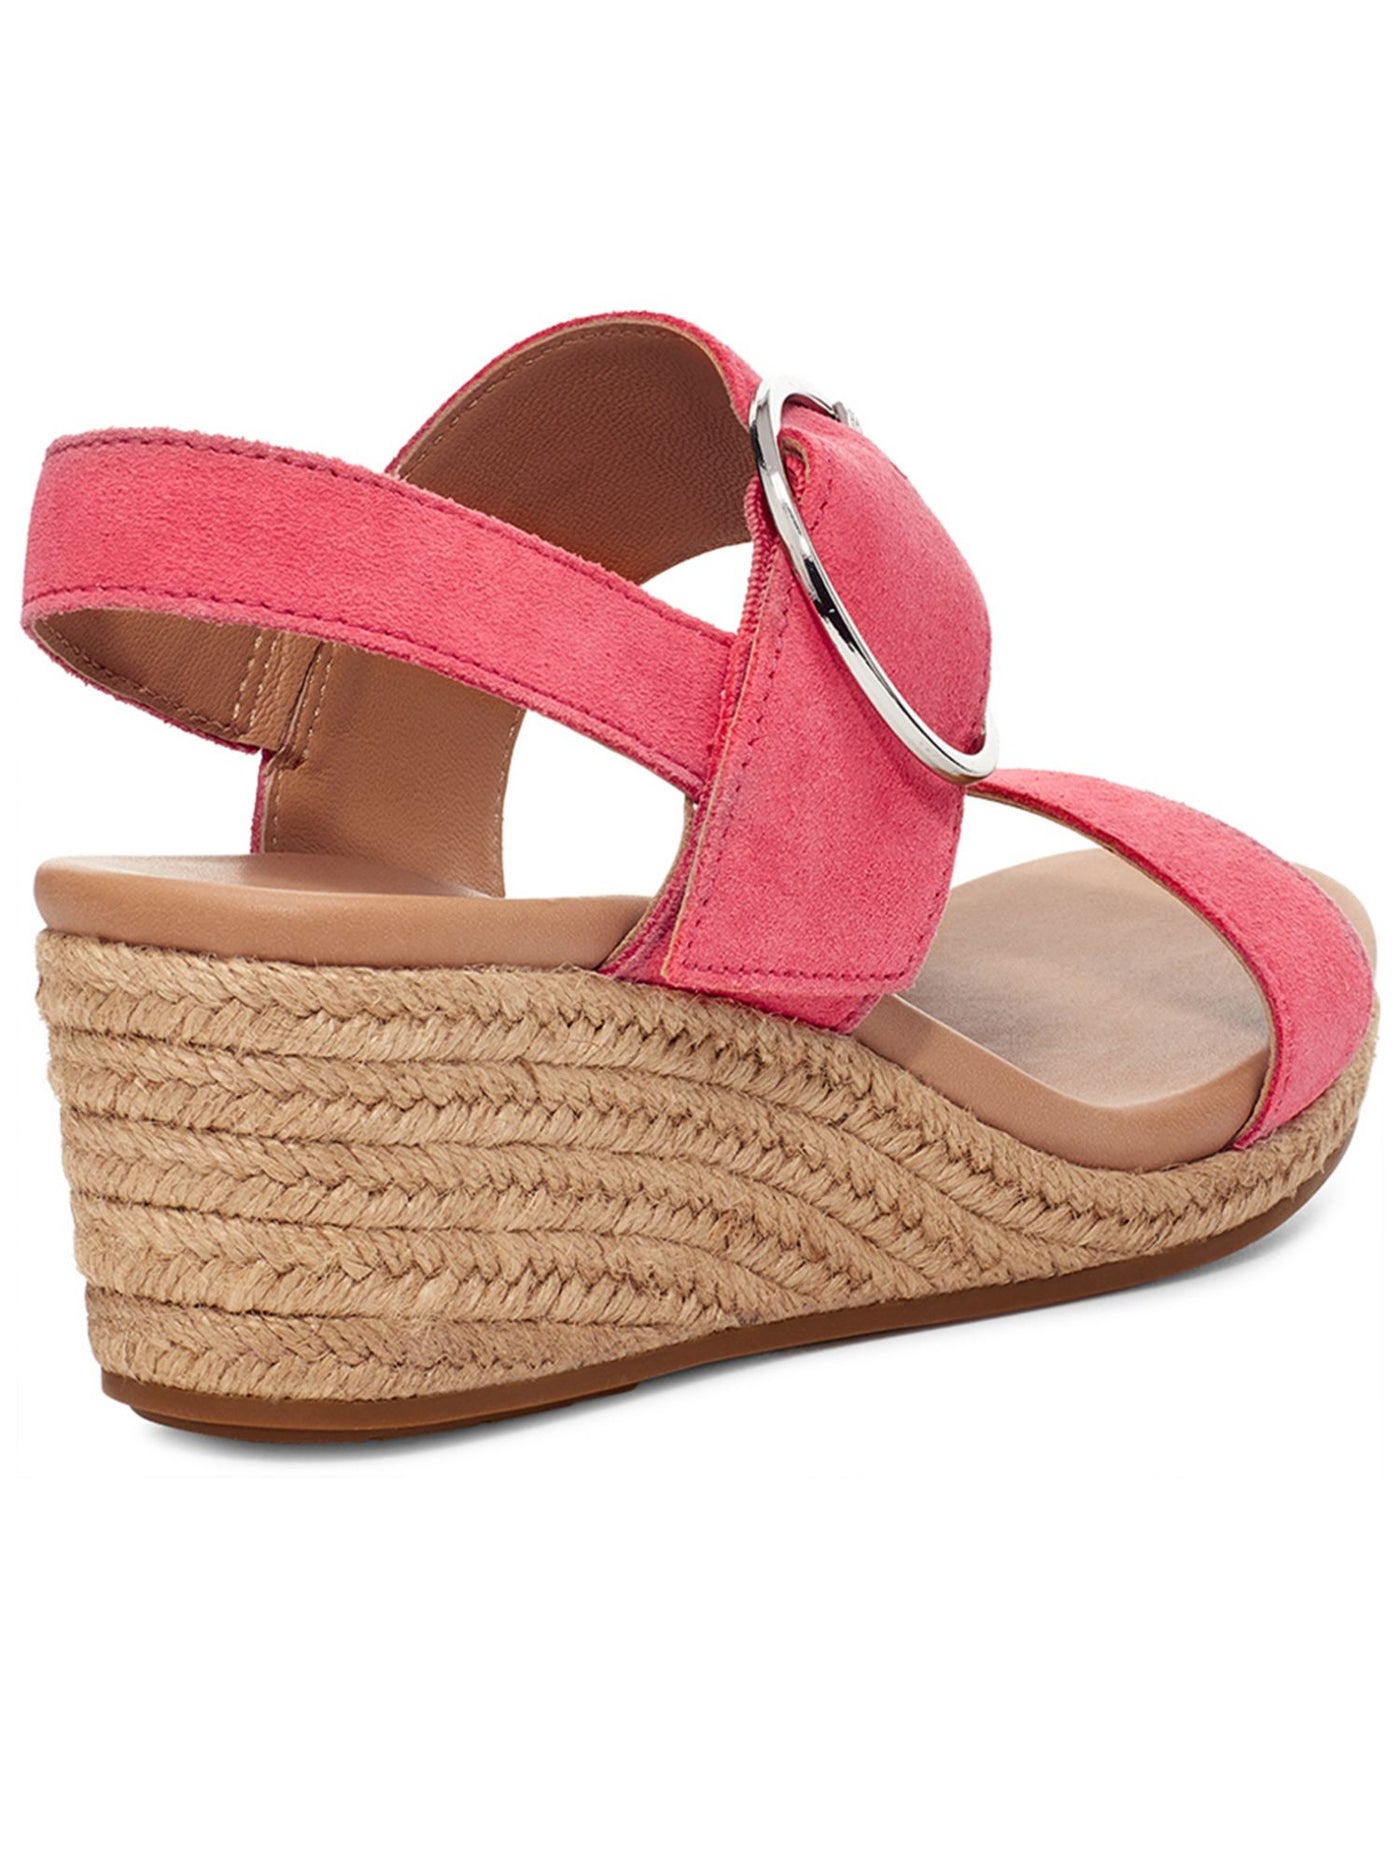 UGG Womens Pink Padded Navee Round Toe Wedge Buckle Leather Espadrille Shoes 8